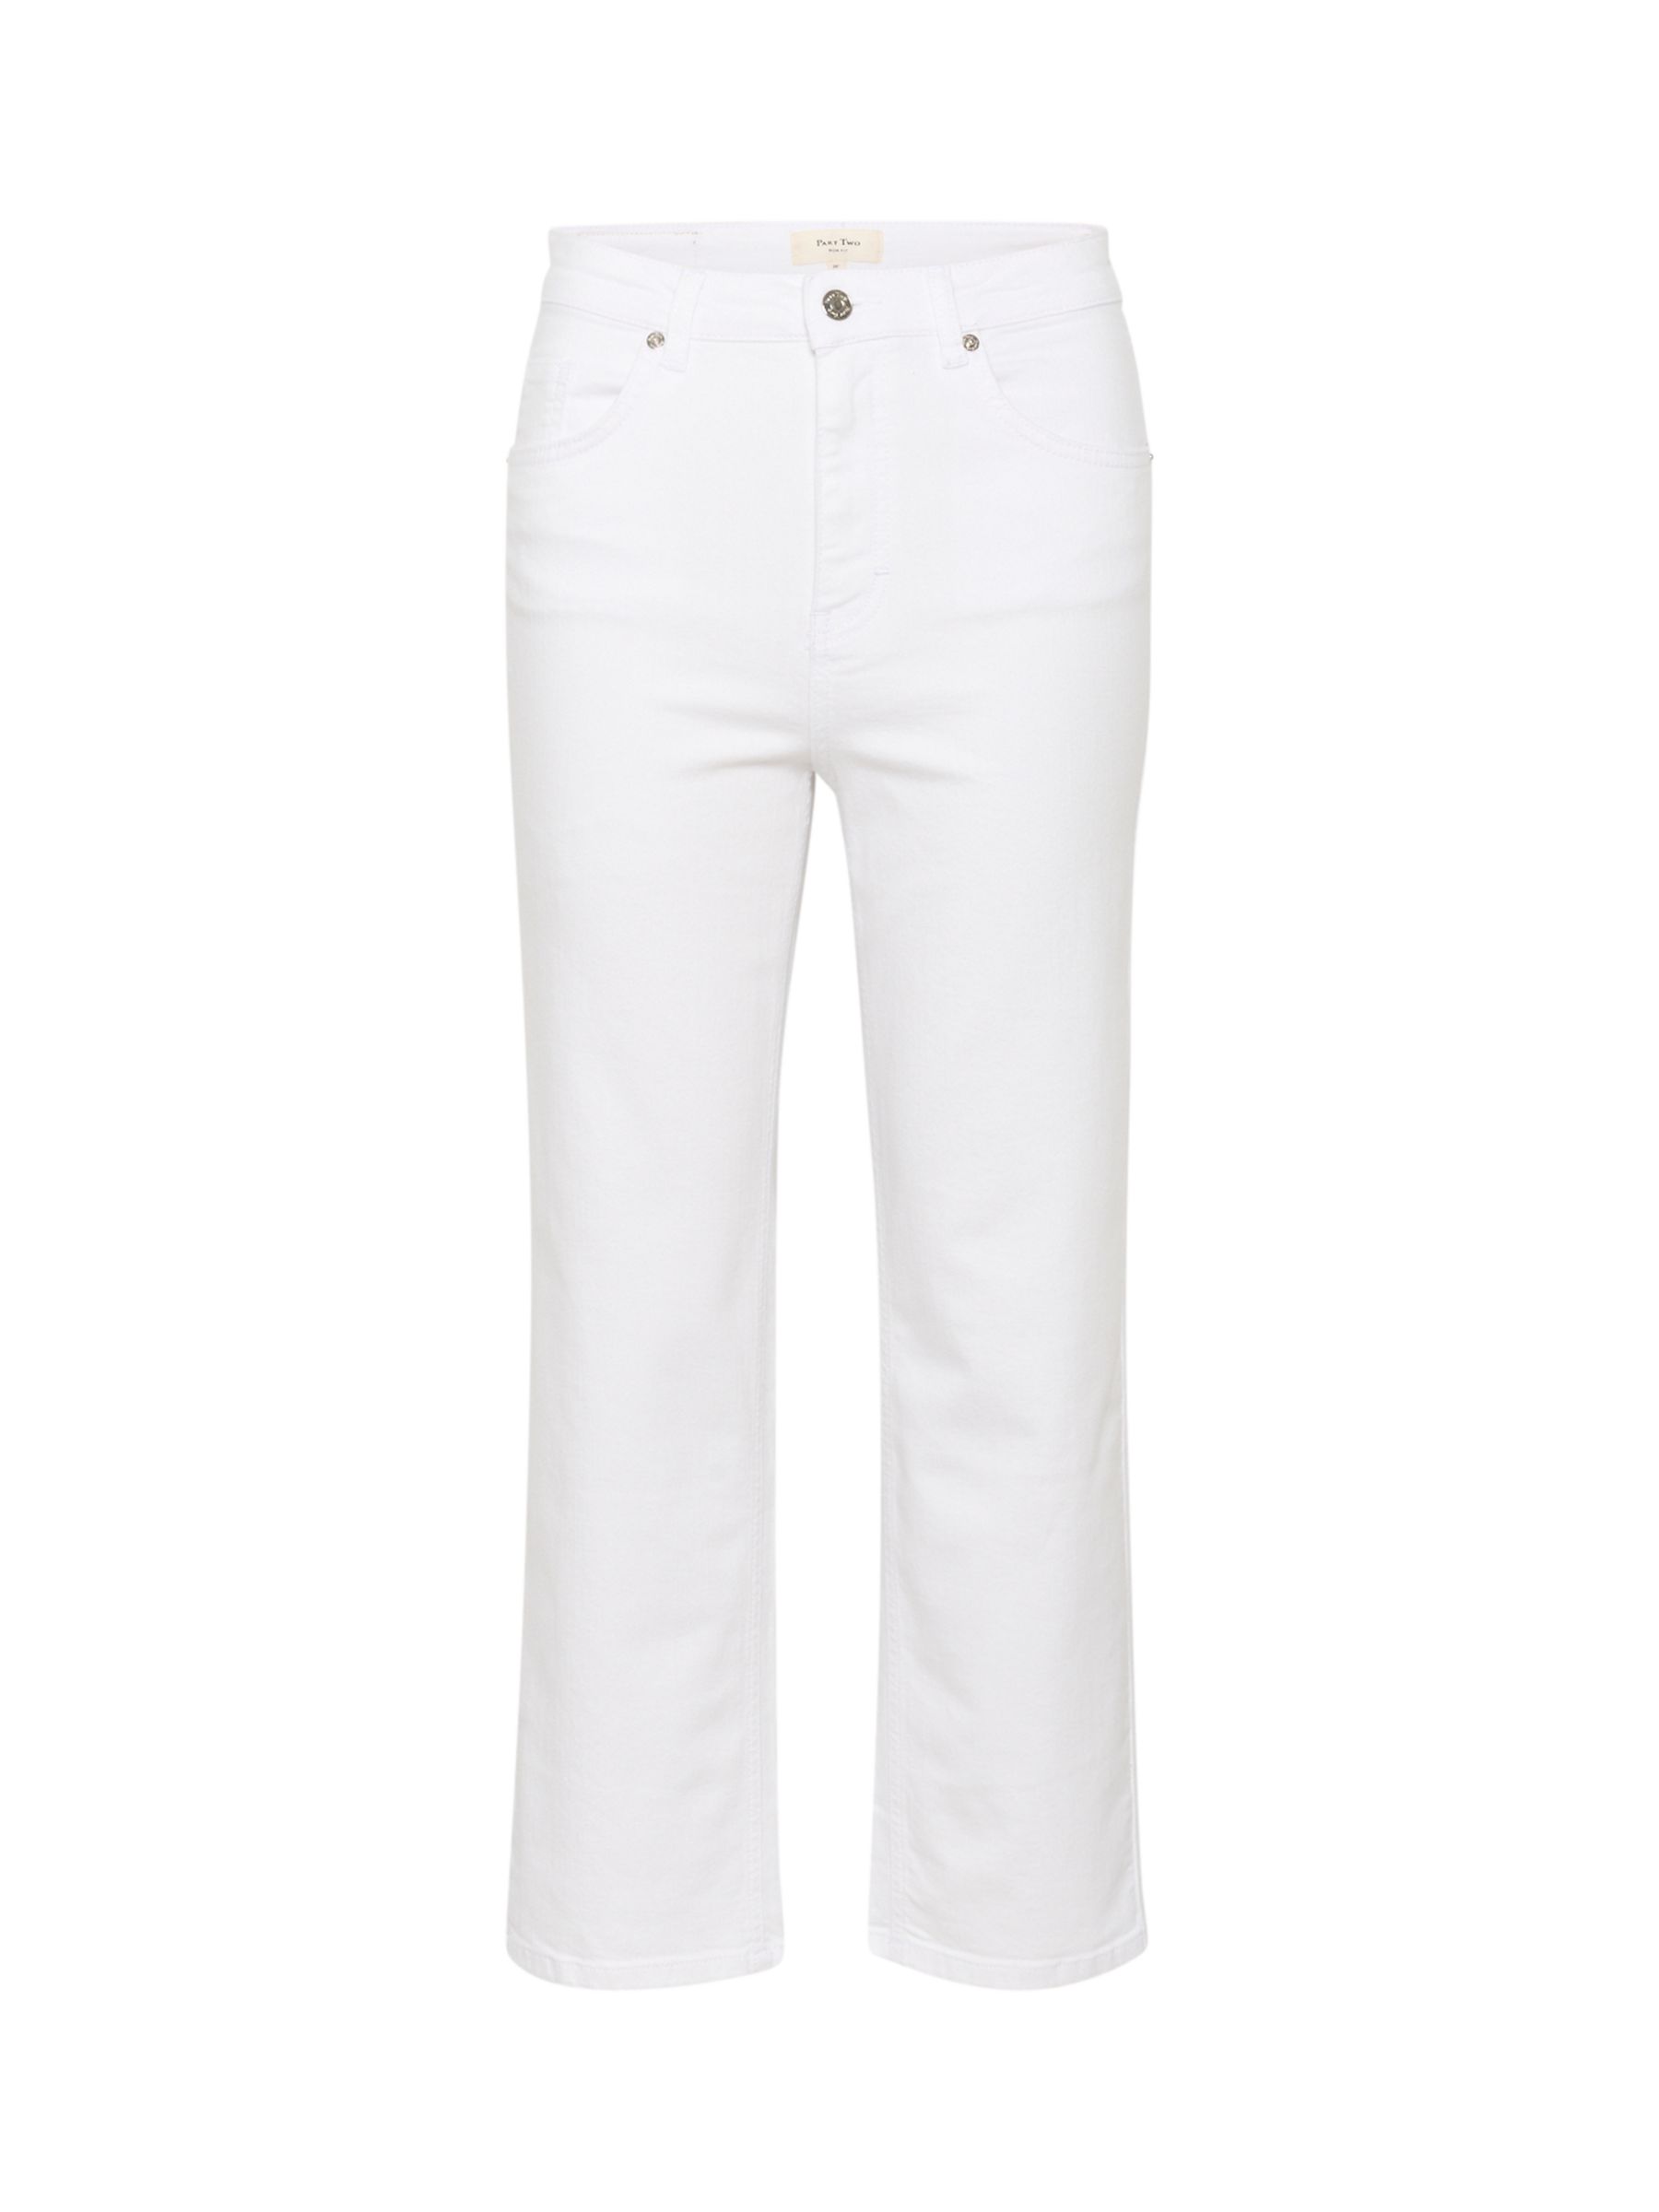 Buy Part Two Judy Straight Legs High Waist Jeans, Bright White Online at johnlewis.com